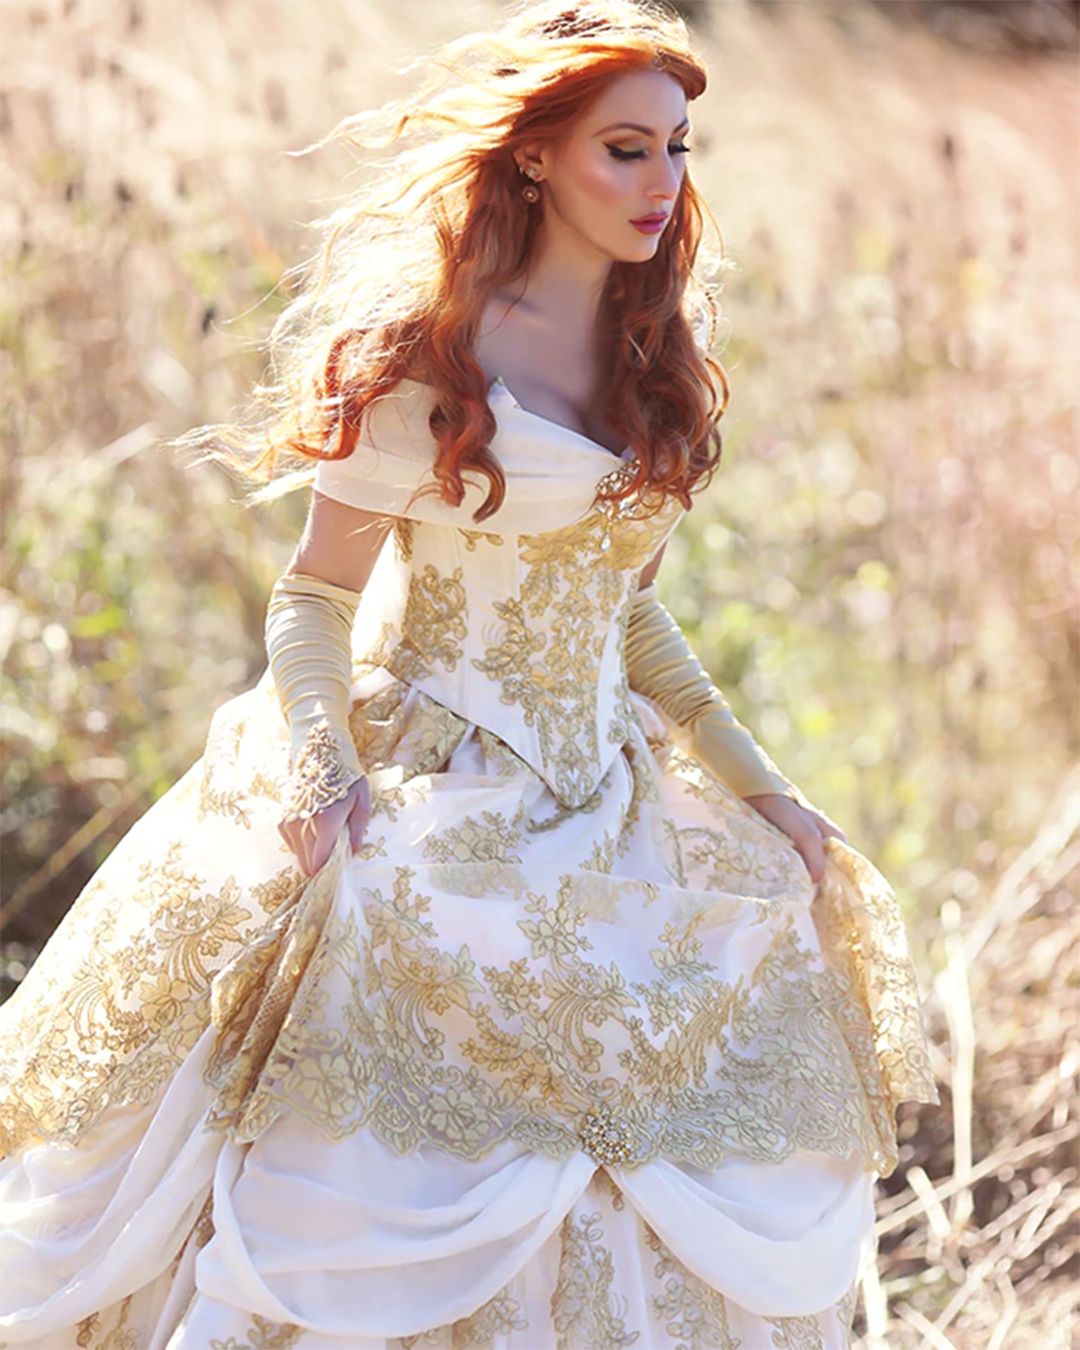 gold wedding gowns white with lace victorian style romanticthreads